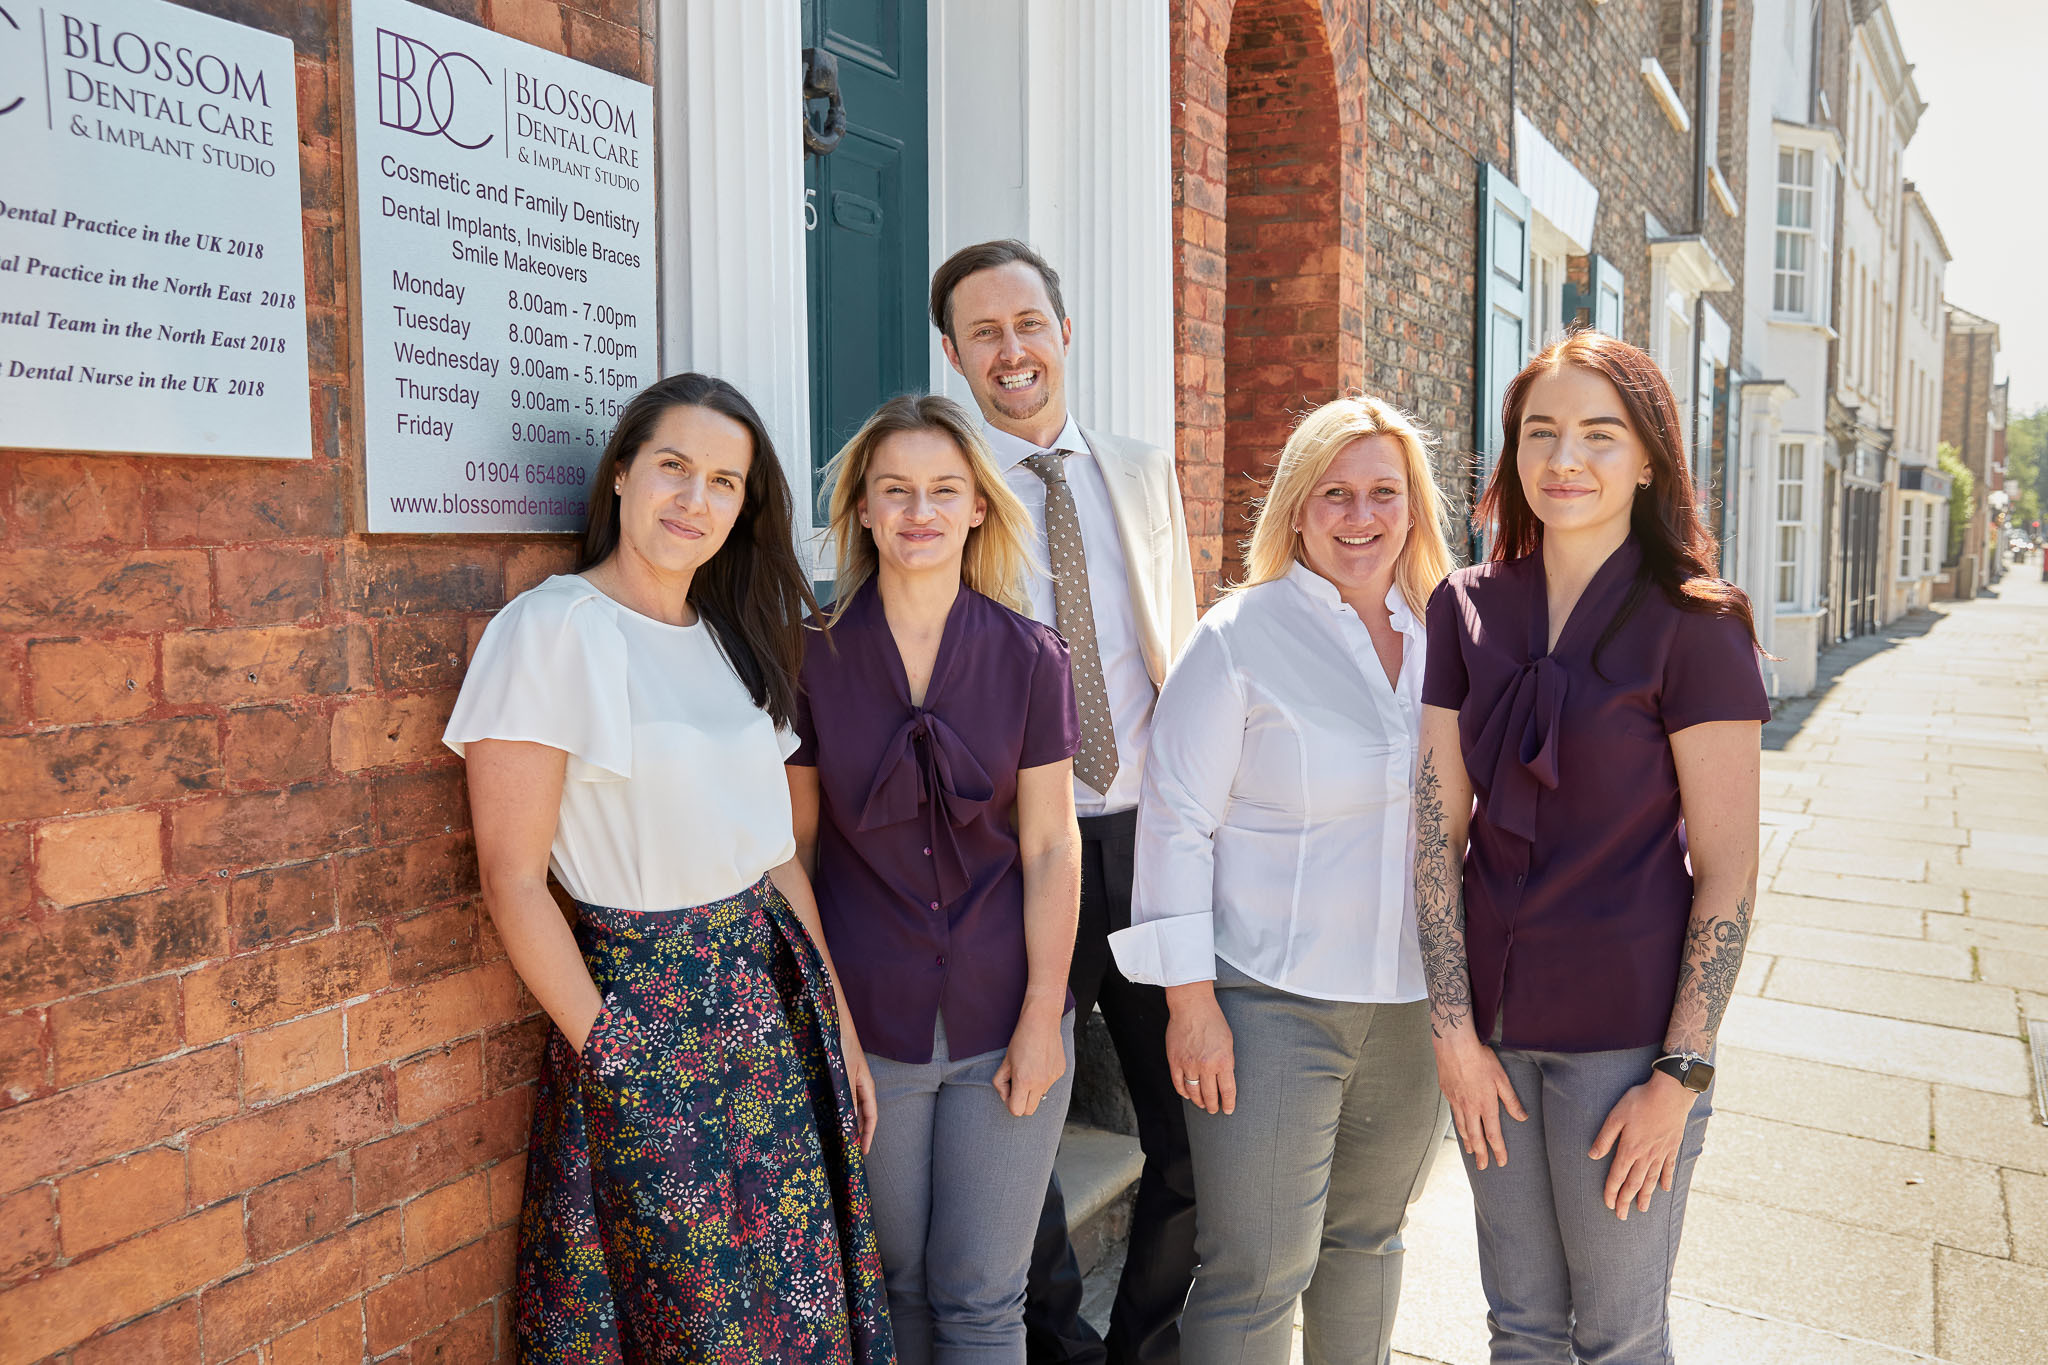 Blossom Dental Care in York is braced for expansion